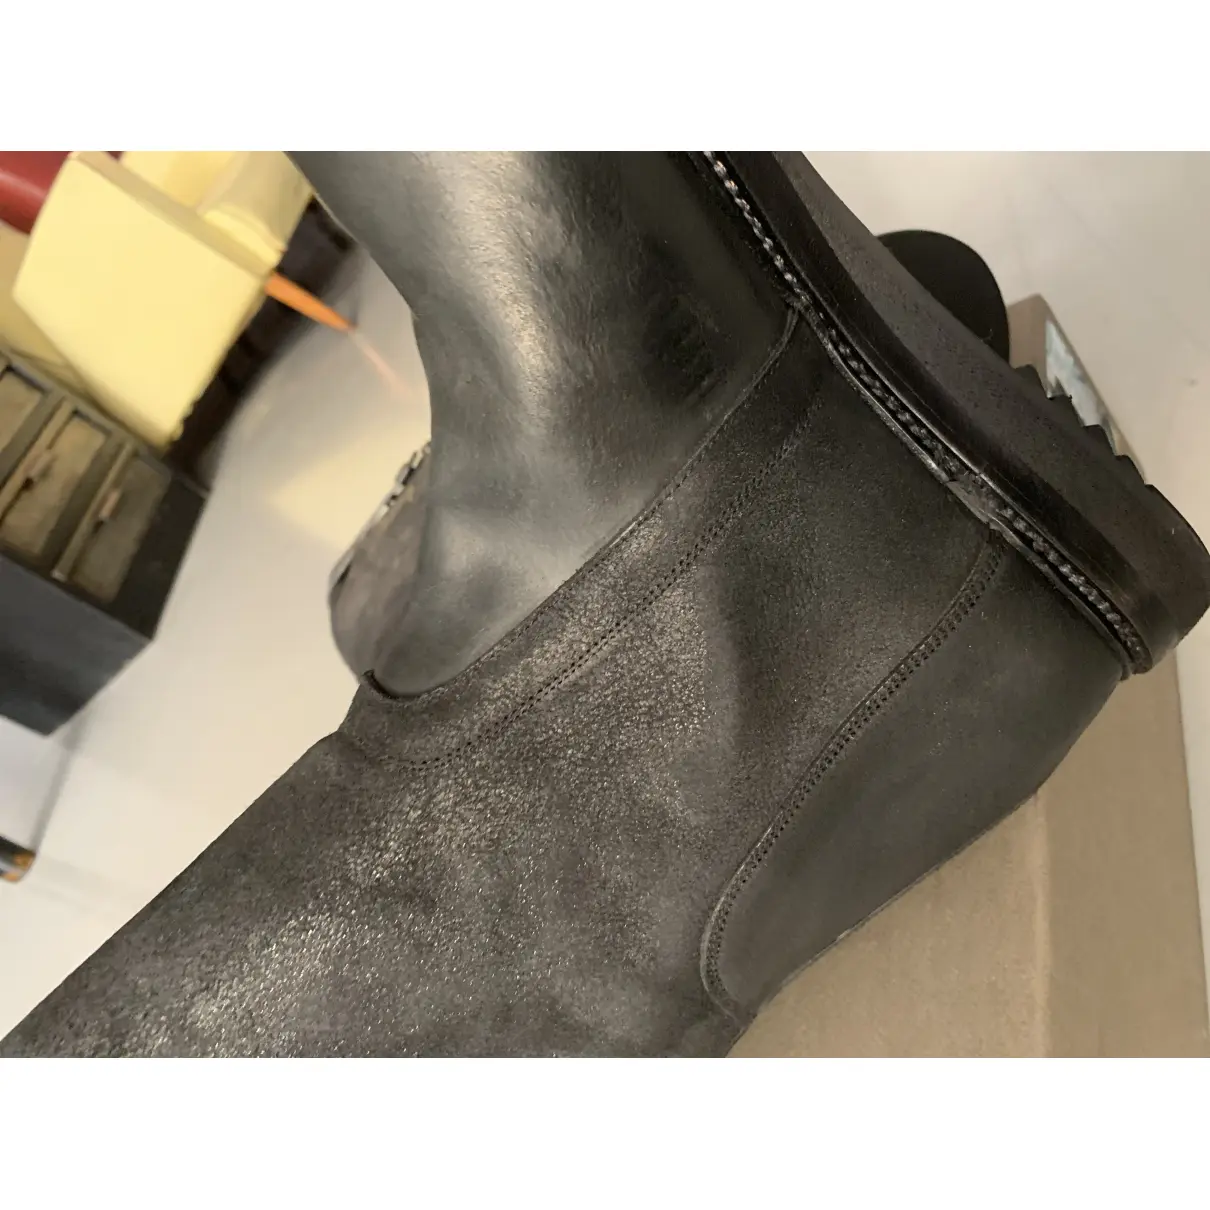 Leather boots Rick Owens